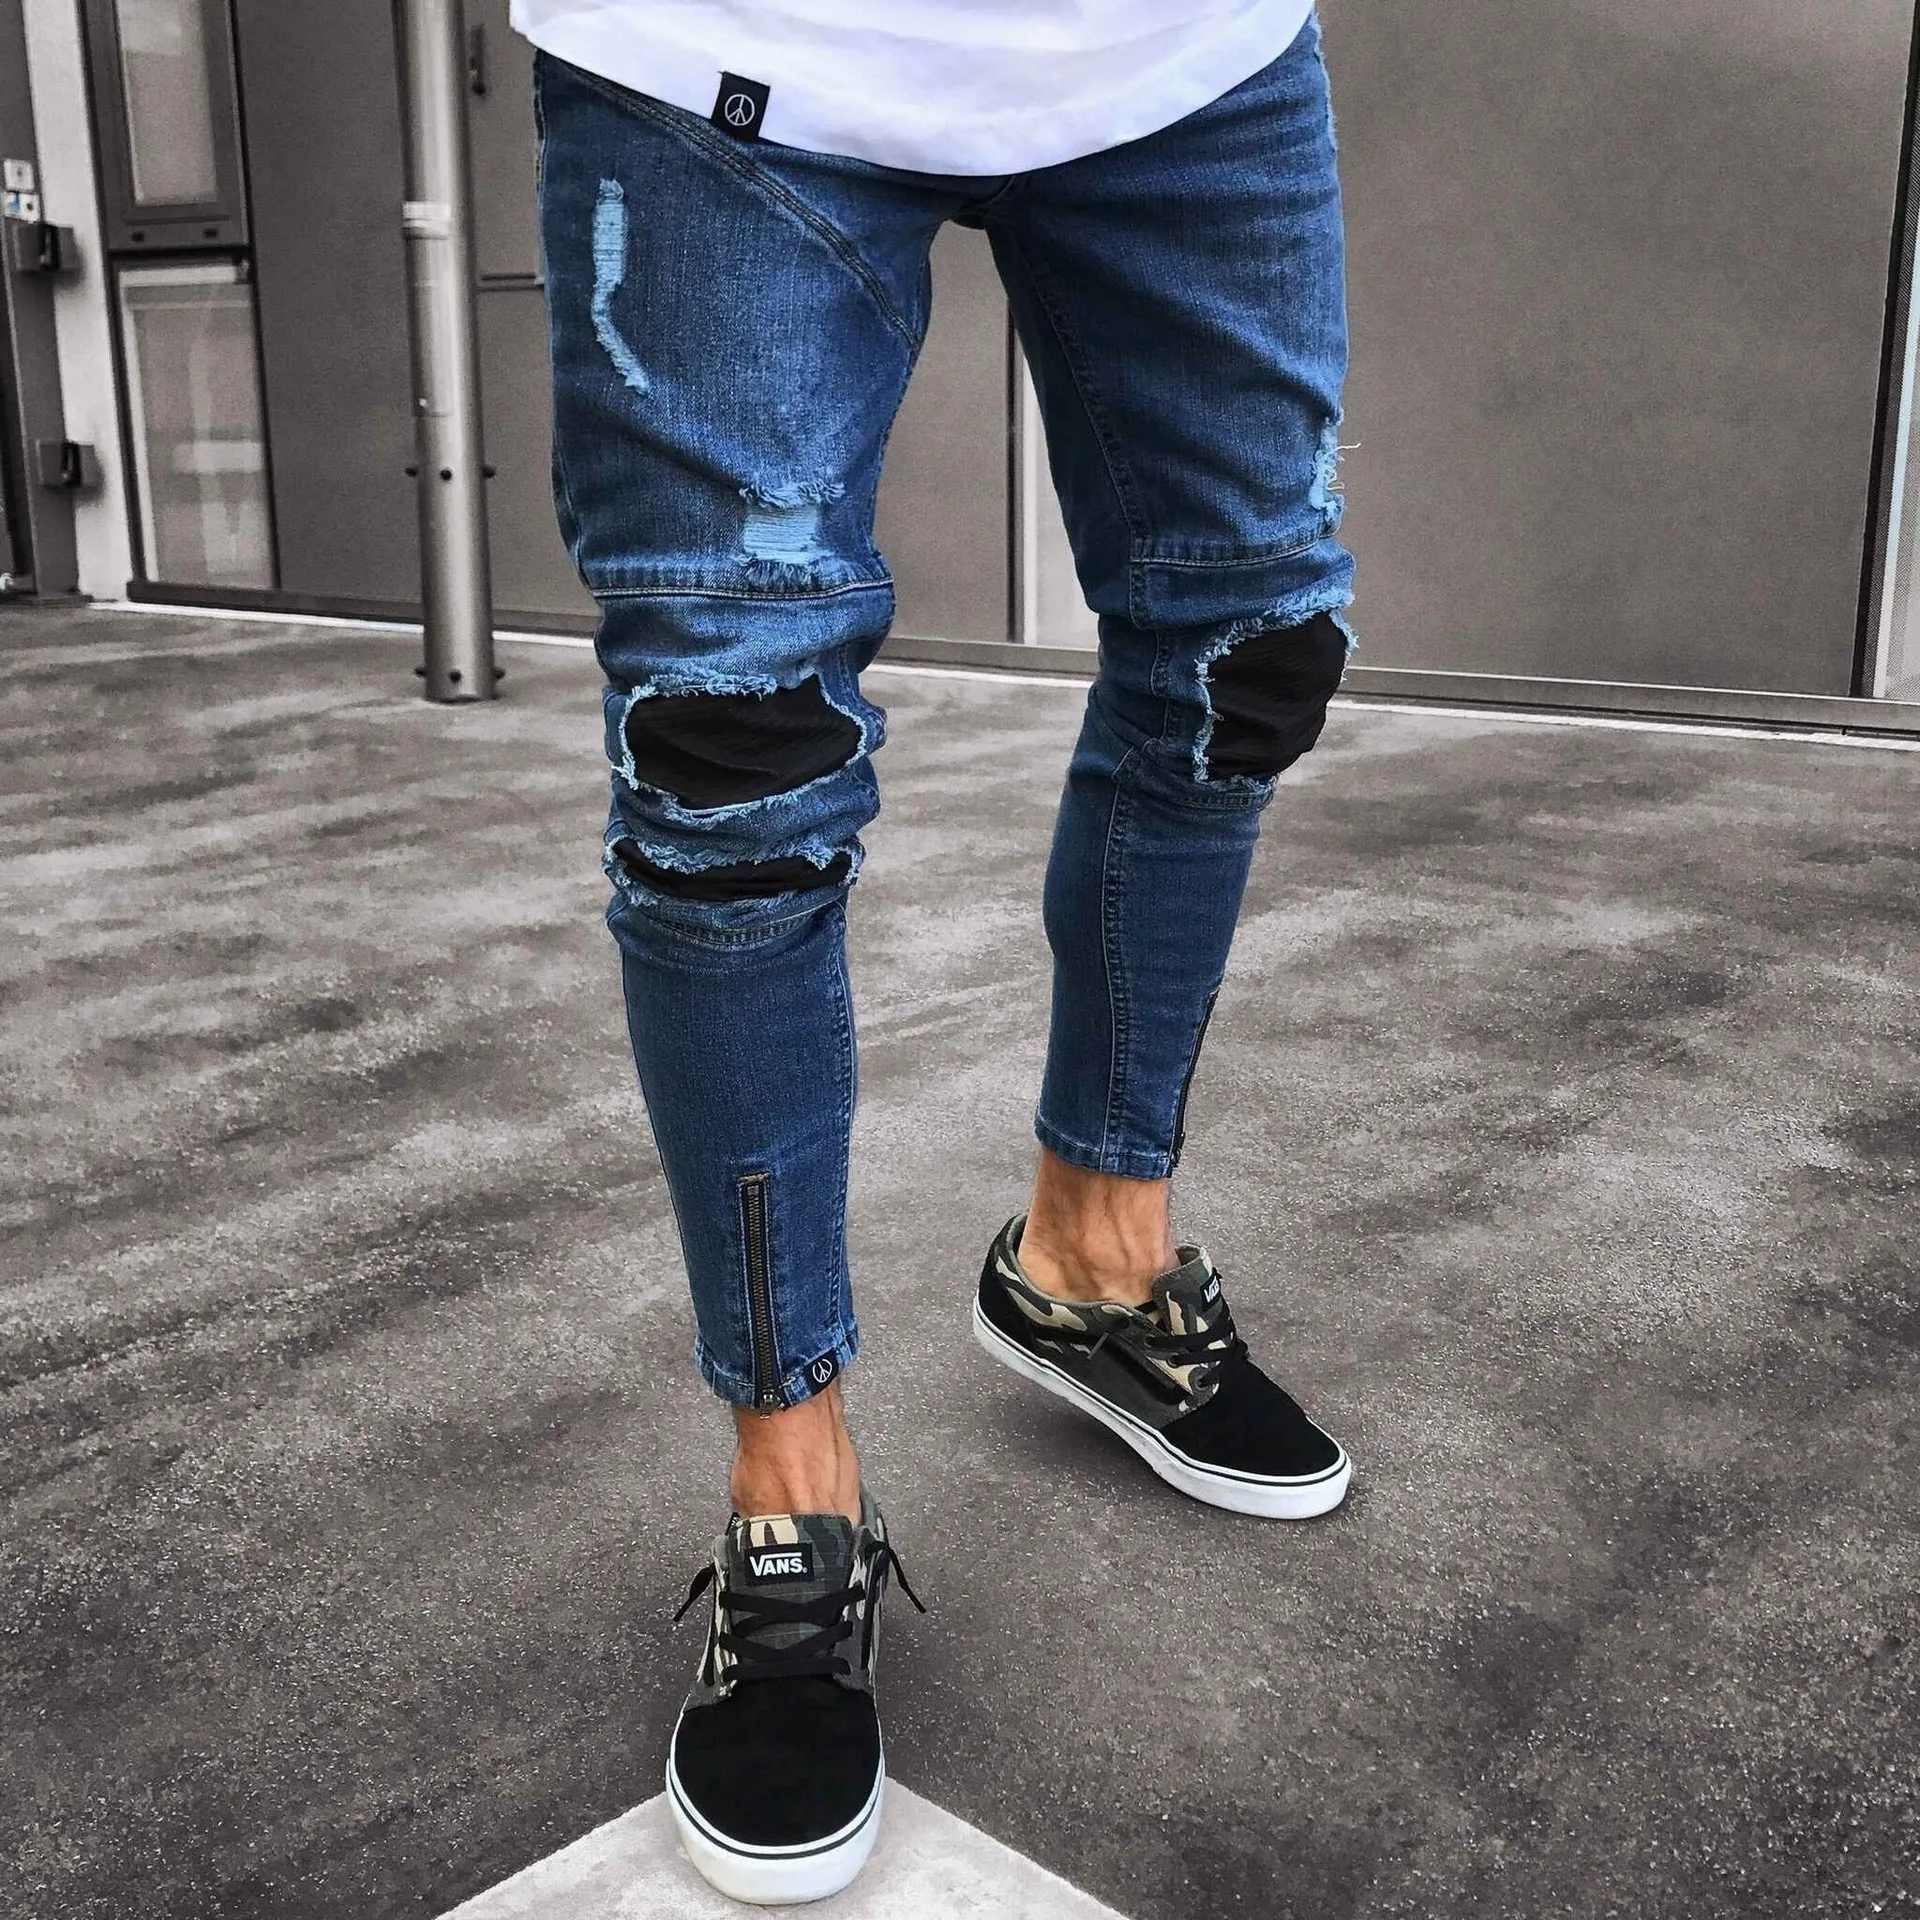 

Mens Ripped Distressed Skinny Jeans Beggar Patches Male Streetwear Hip hop Broken Hole Denim Pencil Pants Biker Tight Trousers